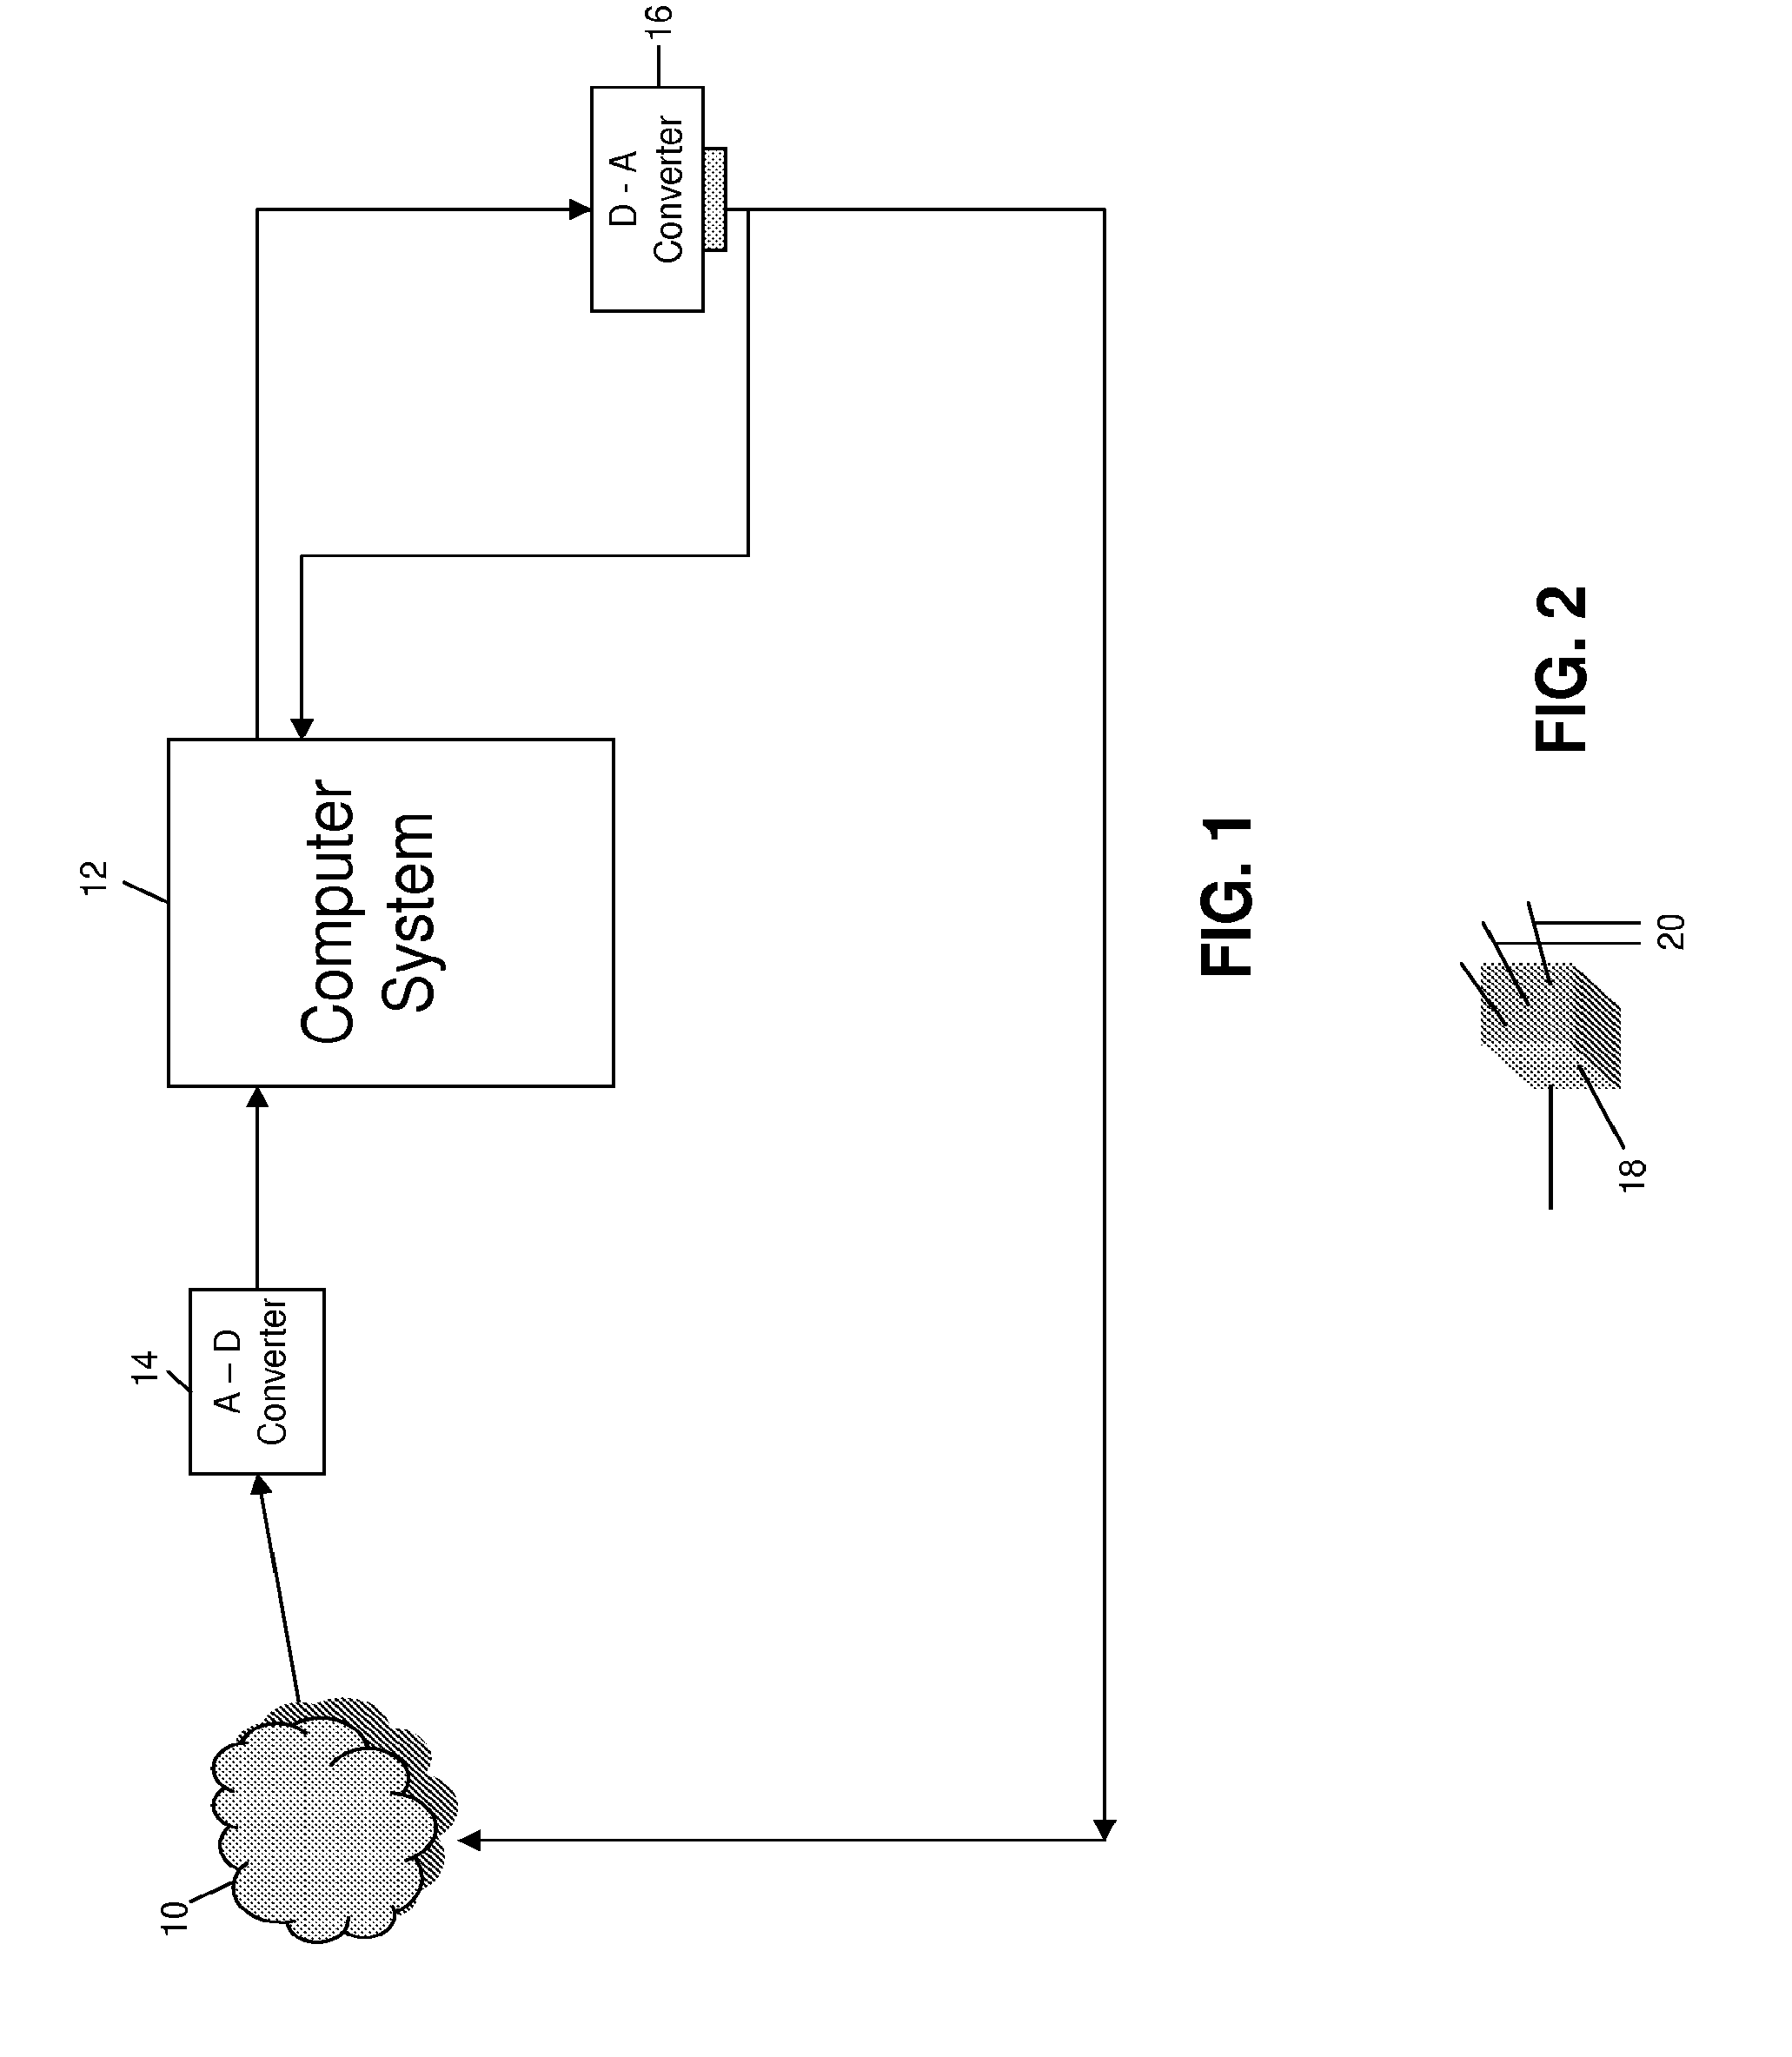 Method and system for processing cancer cell electrical signals for medical therapy